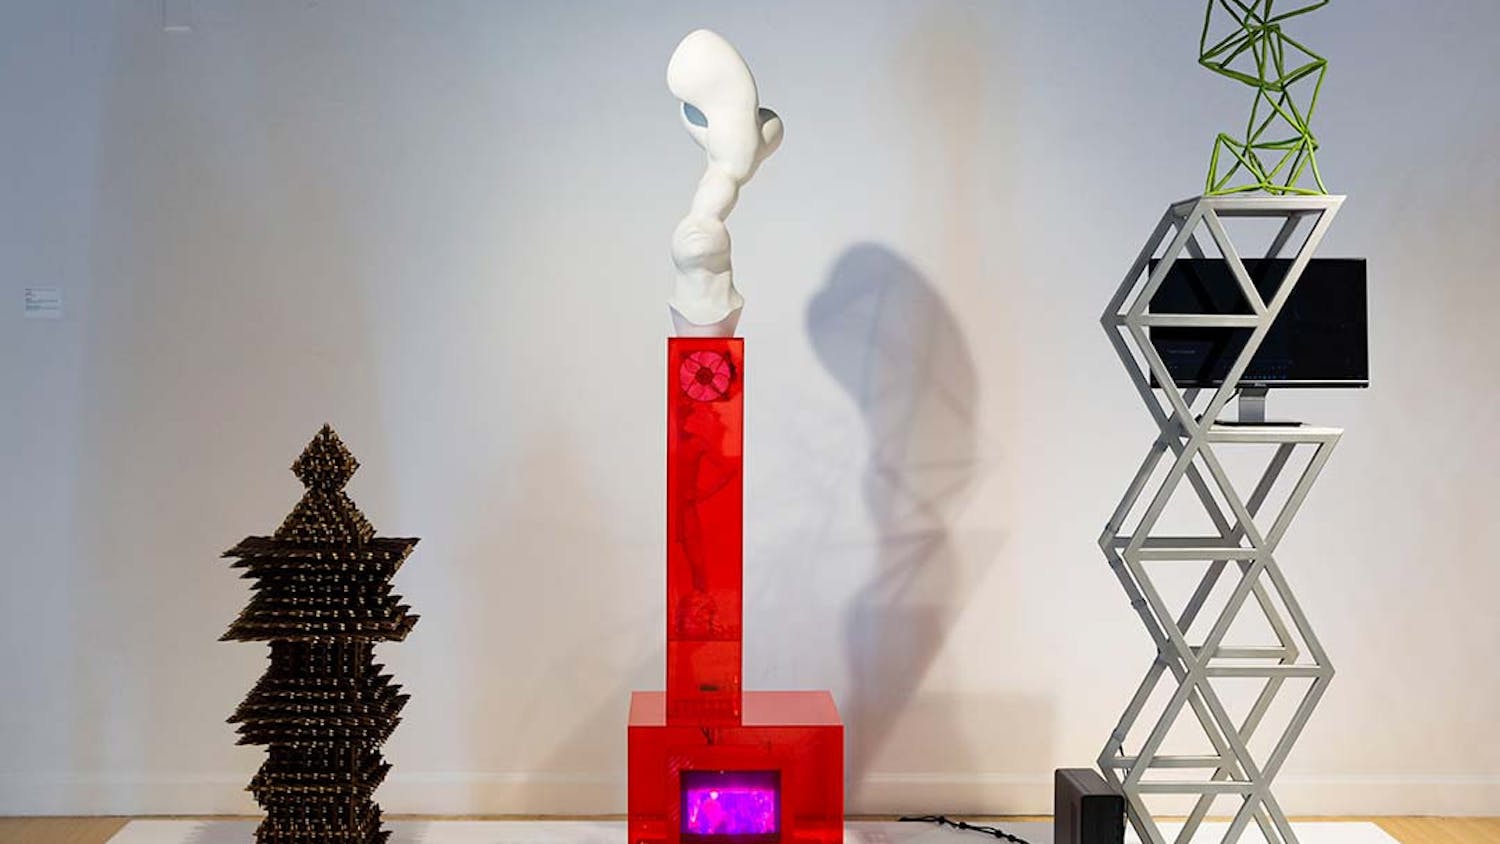 "The Thorn" (left), "The Side" (center) and "The Pleasure Principle" (right) by Eli Kessler. All three pieces comment on the underlying psychology of American folk art, 1980s pop culture and contemporary society.